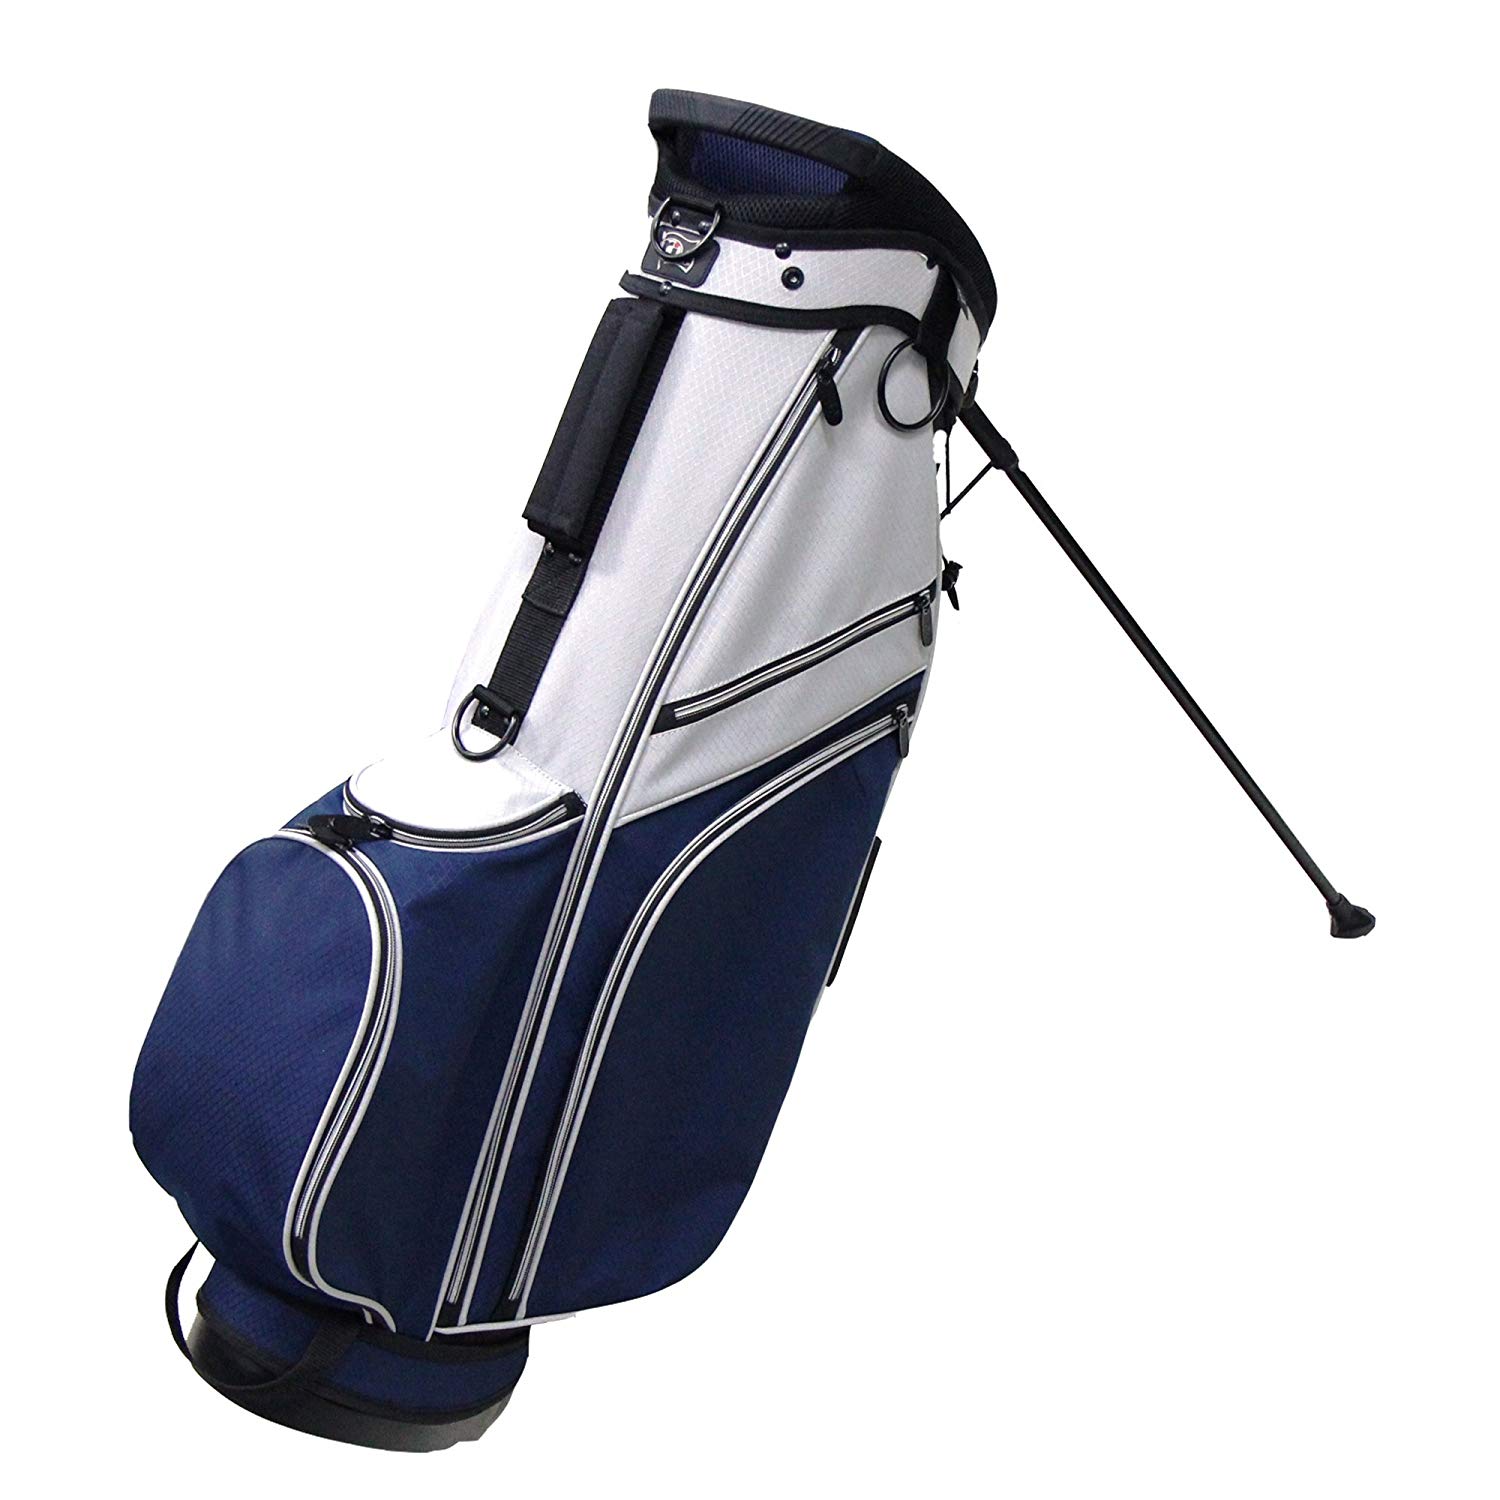 RJ Sports SD-595 Deluxe Golf Stand Bags